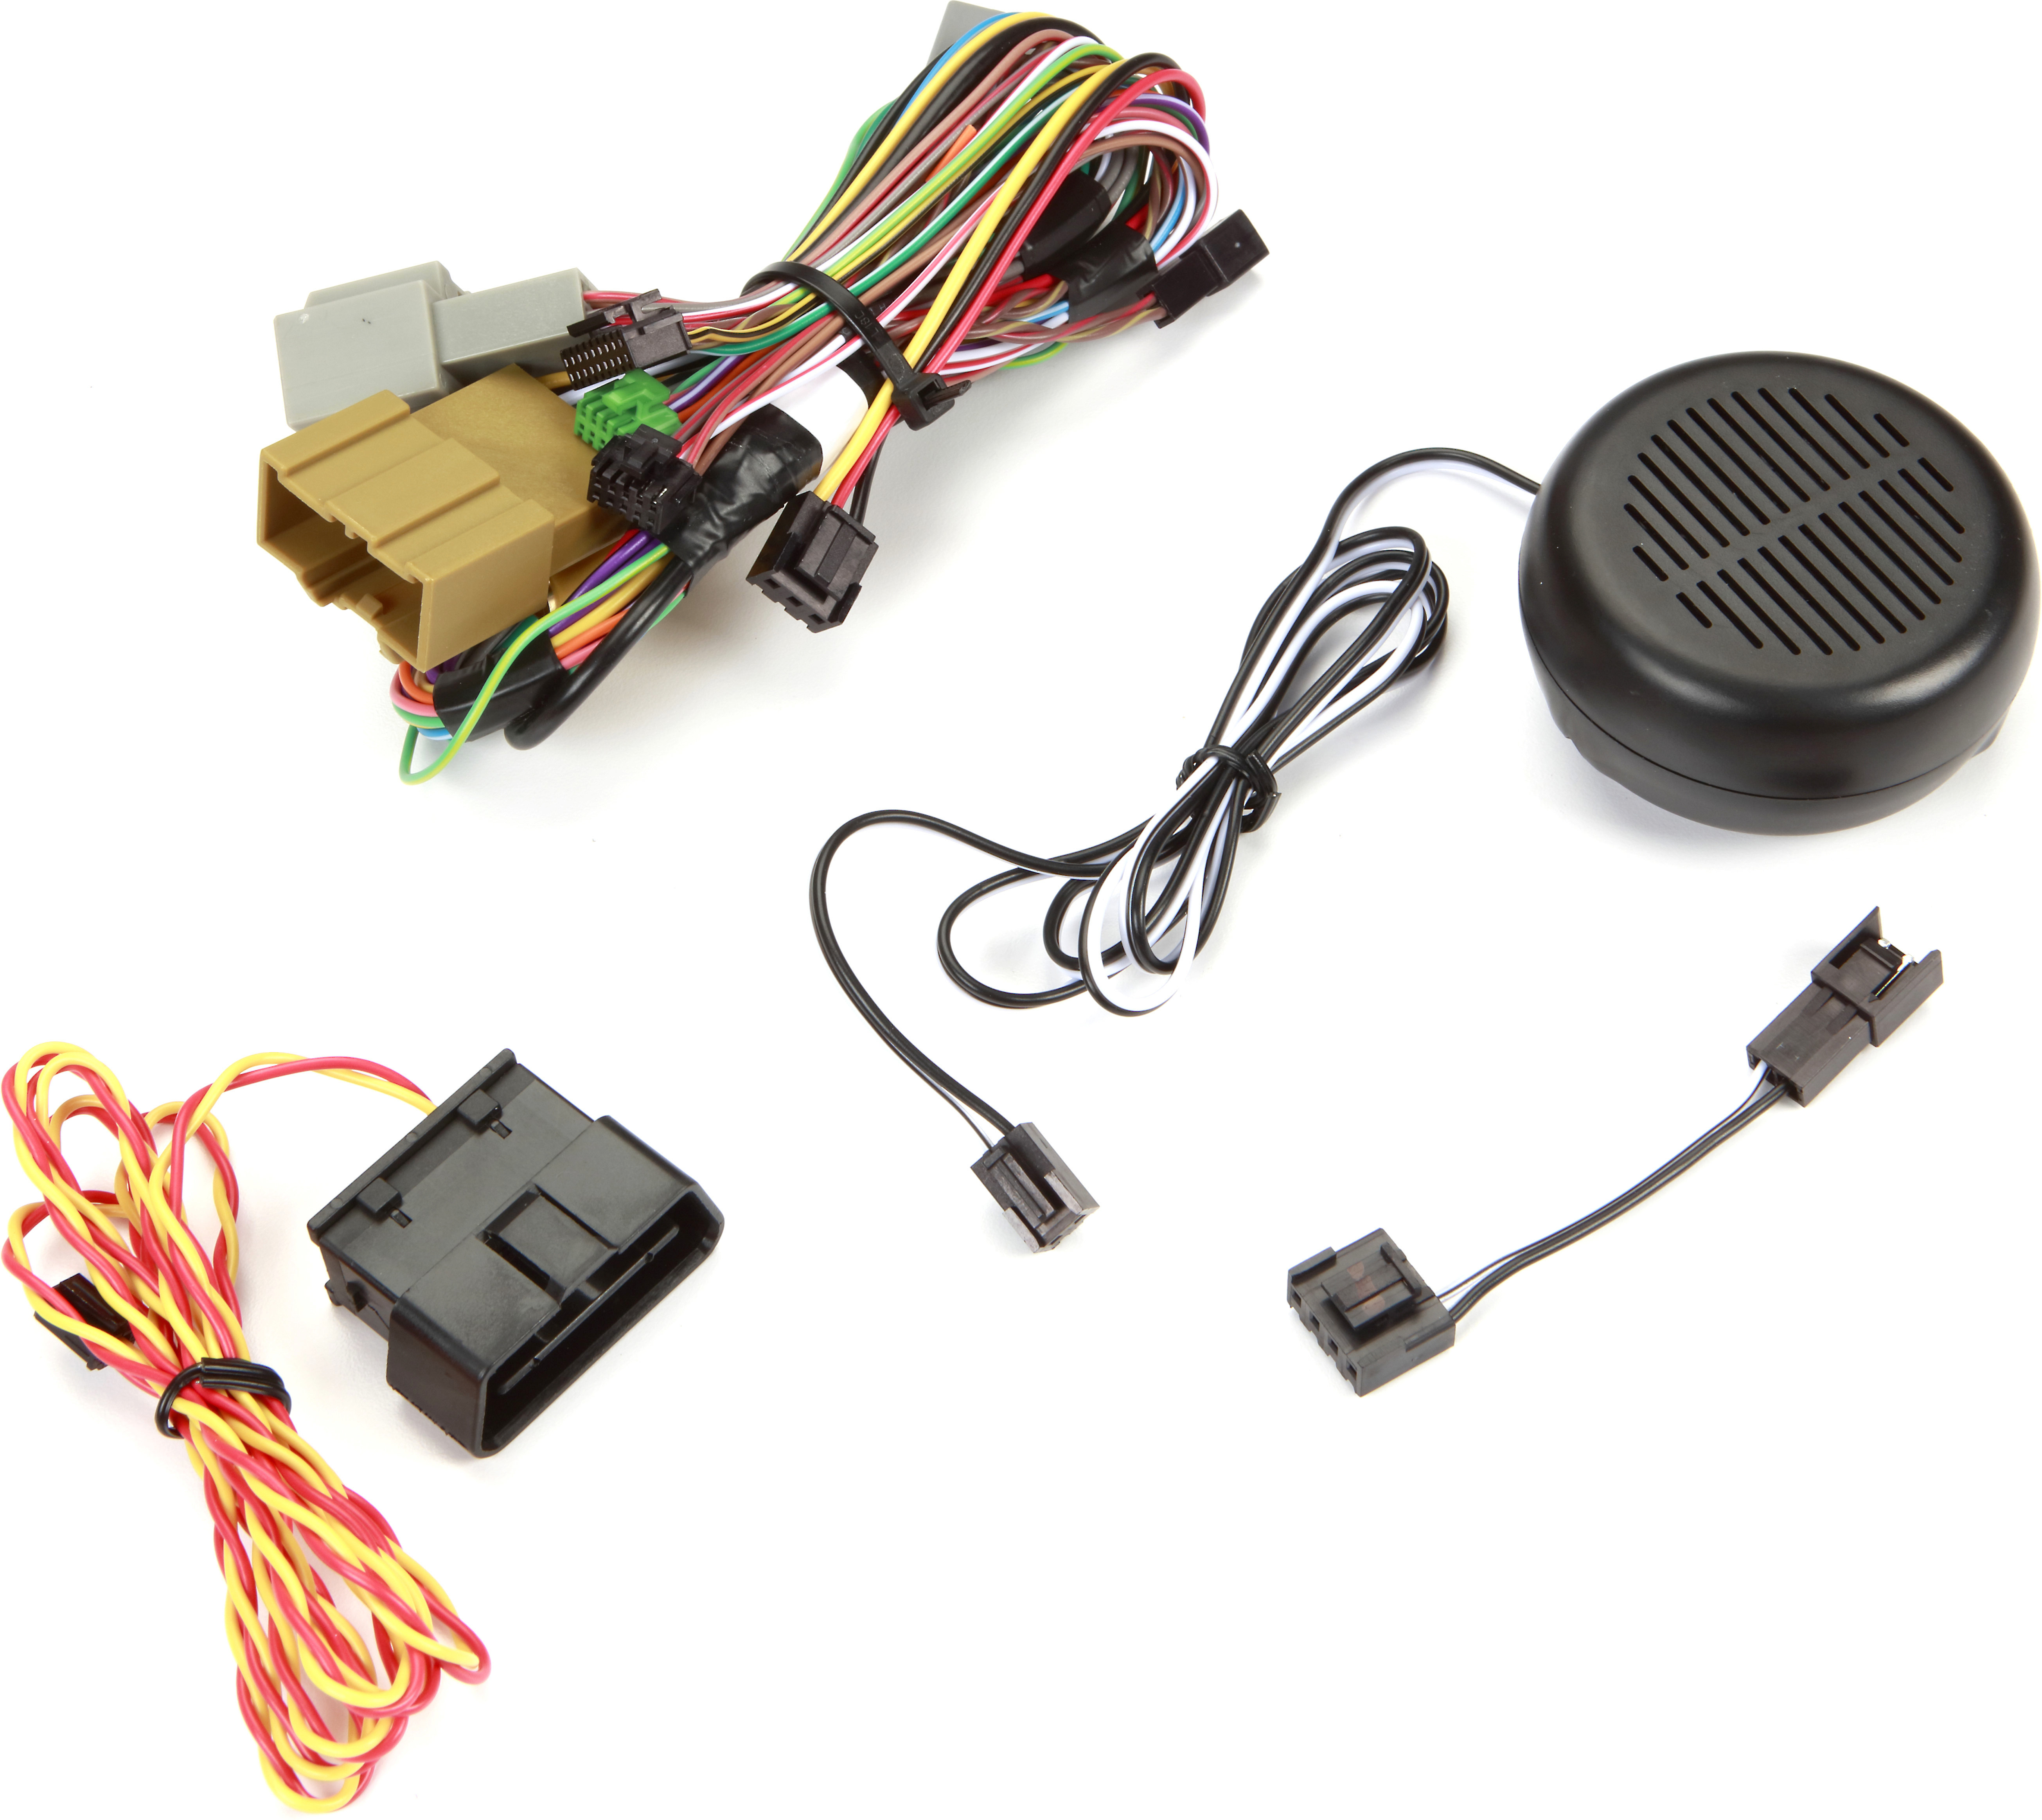 GM VEHICLES  HARNESS W//CHIME FOR ADS-MRR HRN-RR-GM4 IDATALINK MAESTRO GM4